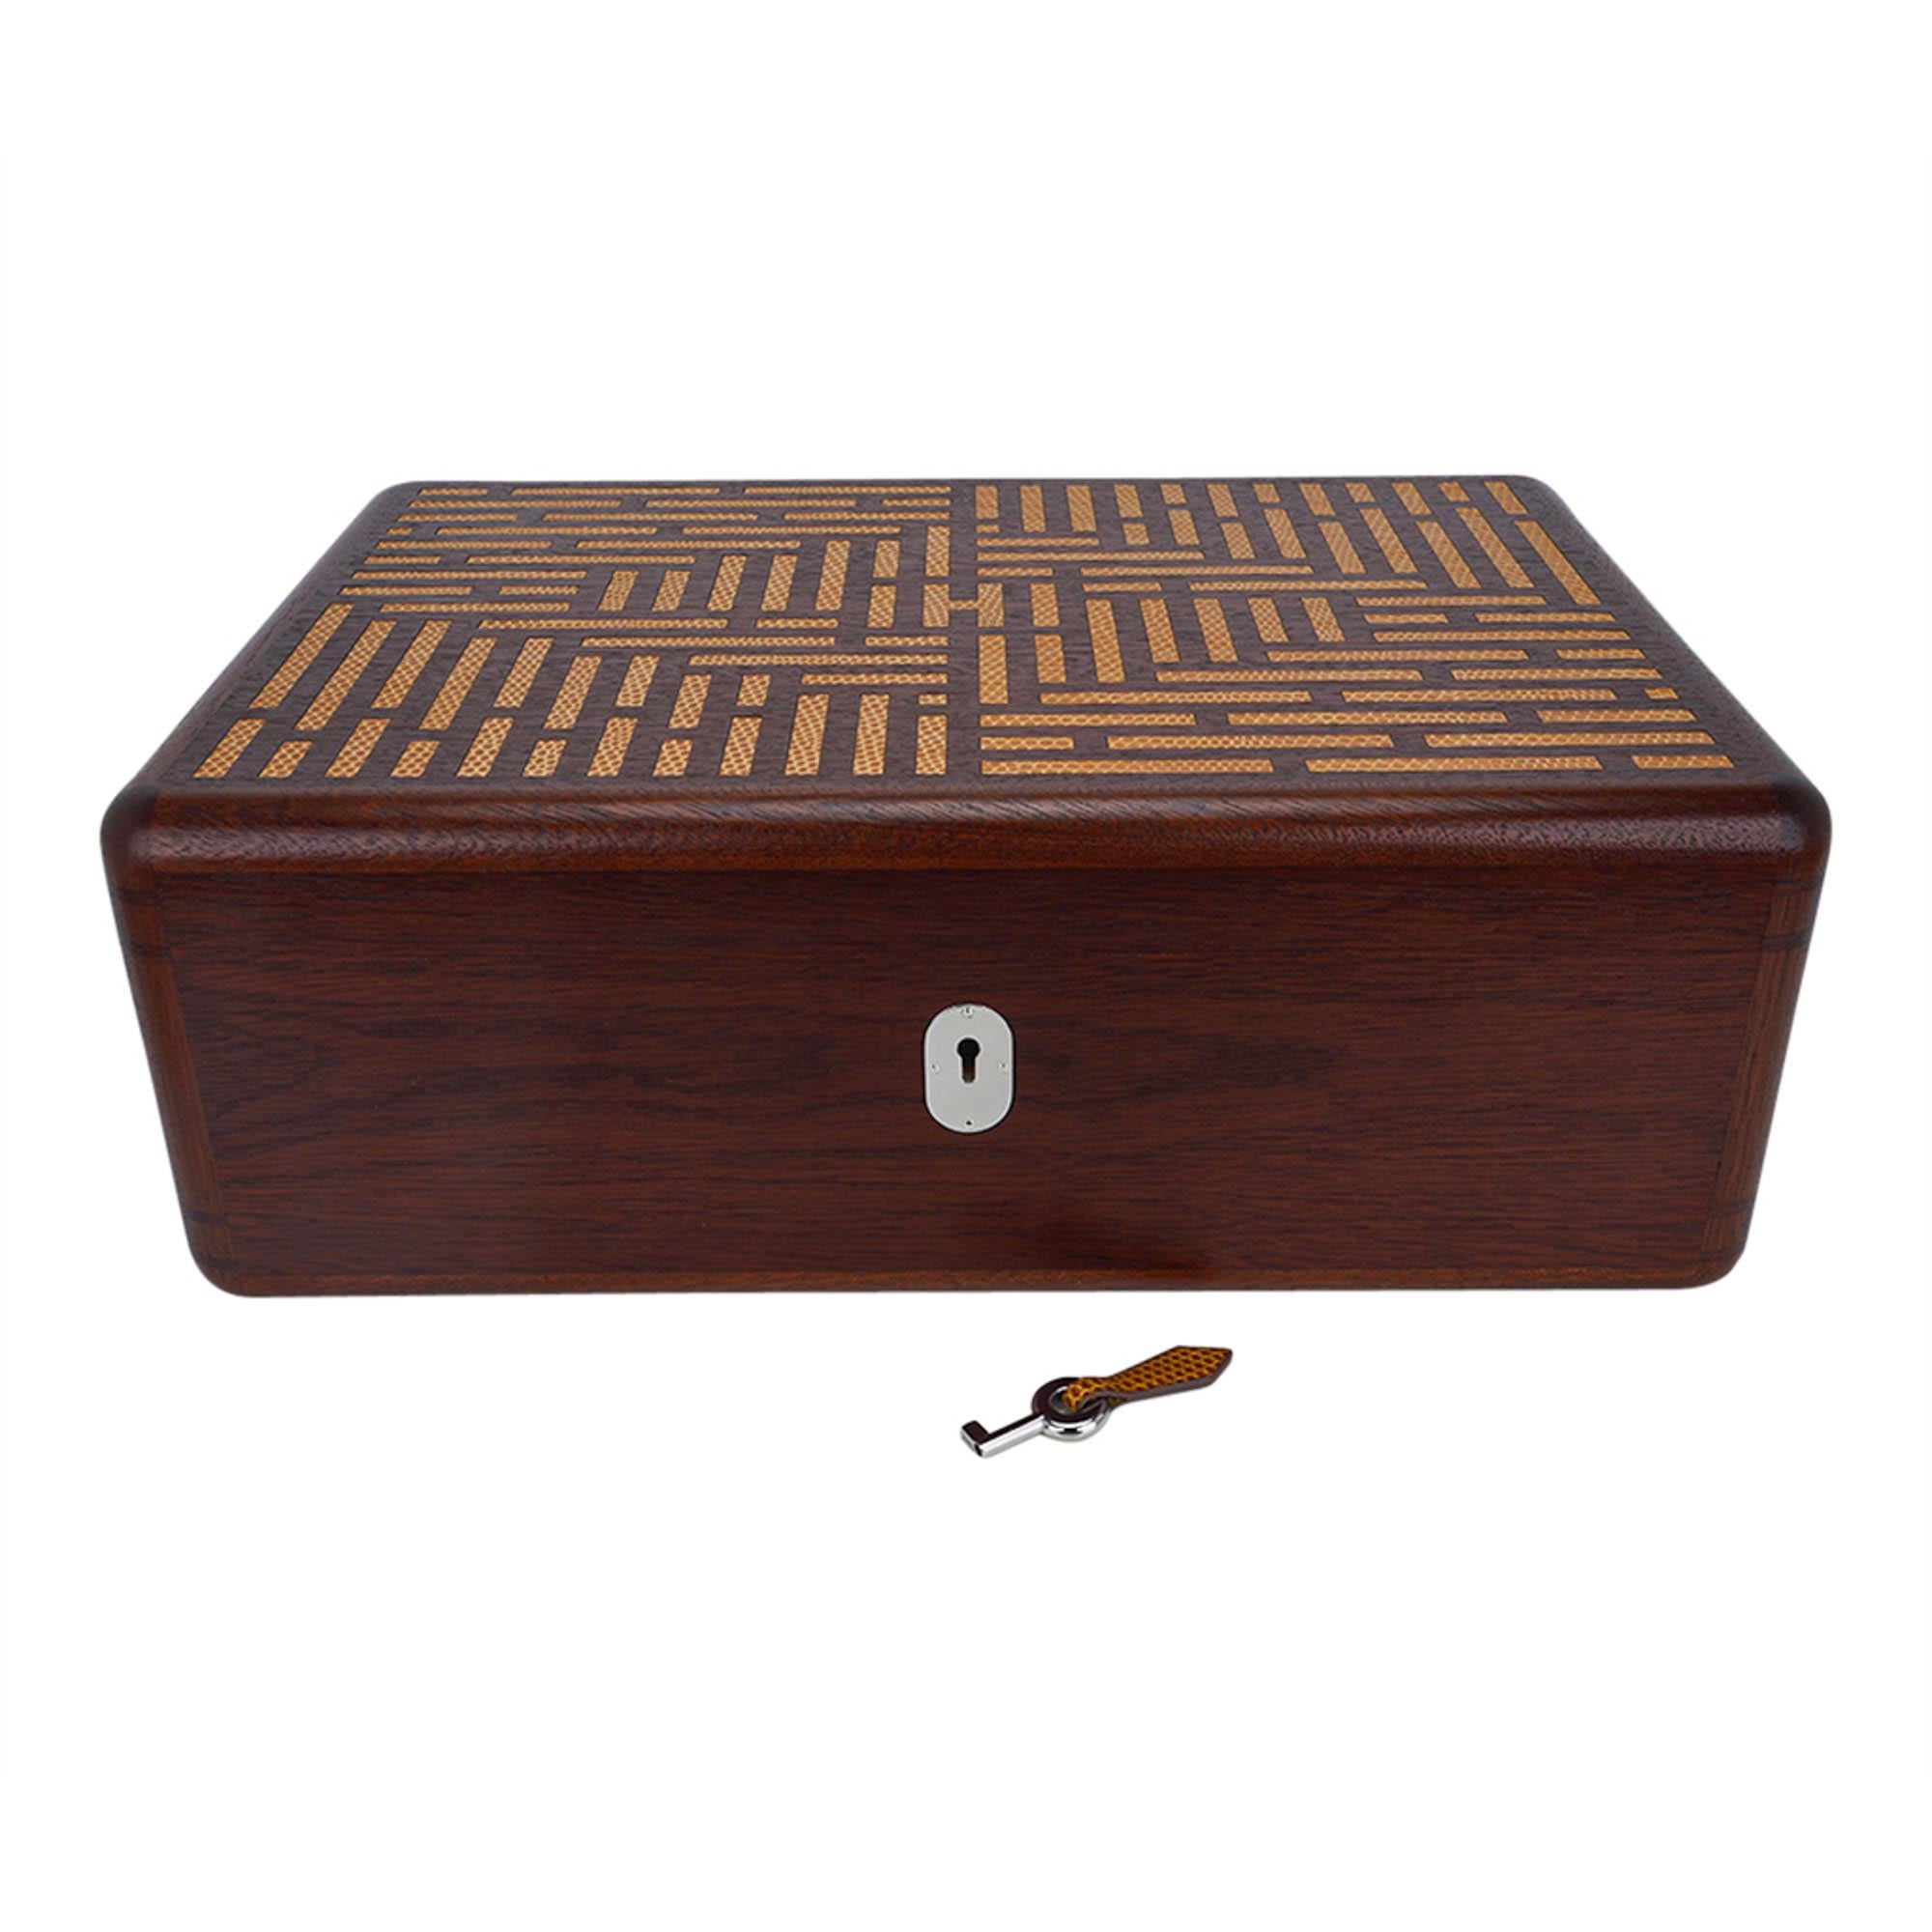 Hermes Coffret a Cigares Humidor Limited Edition Sycamore Holz Sesam Eidechse im Angebot 13